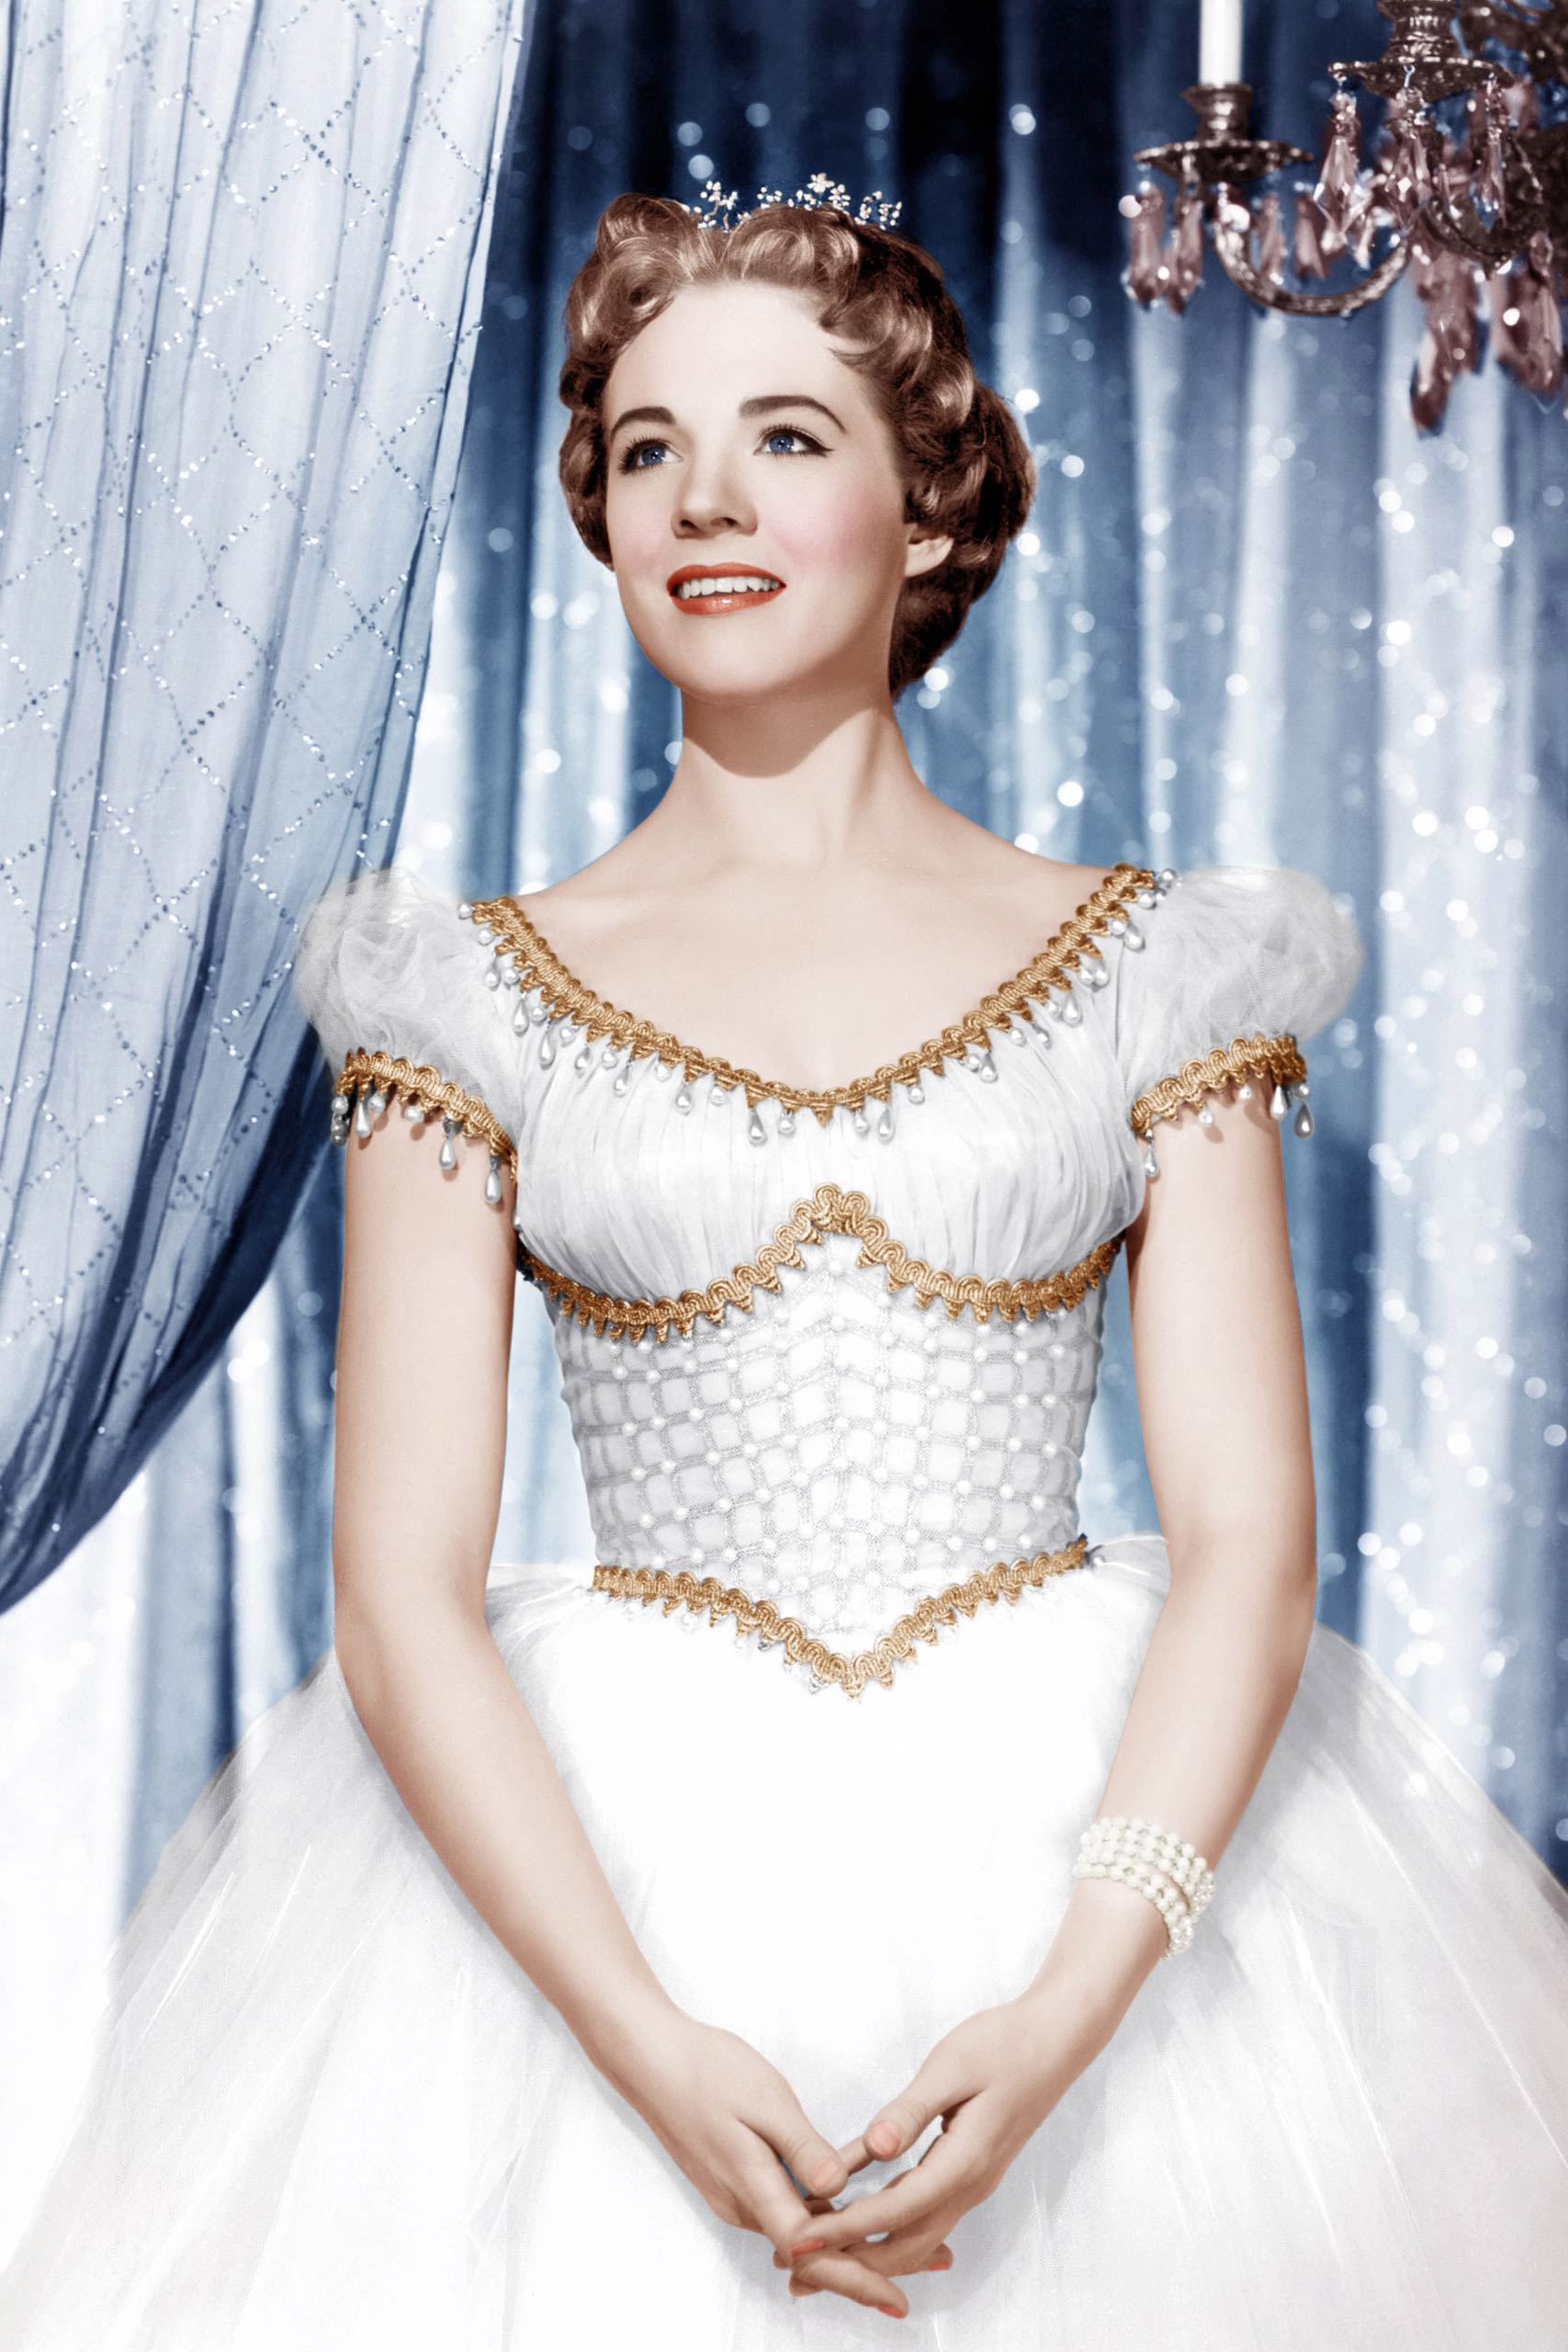 Julie Andrews in a TV special of Rodgers &amp; Hammerstein's Cinderella, 1957